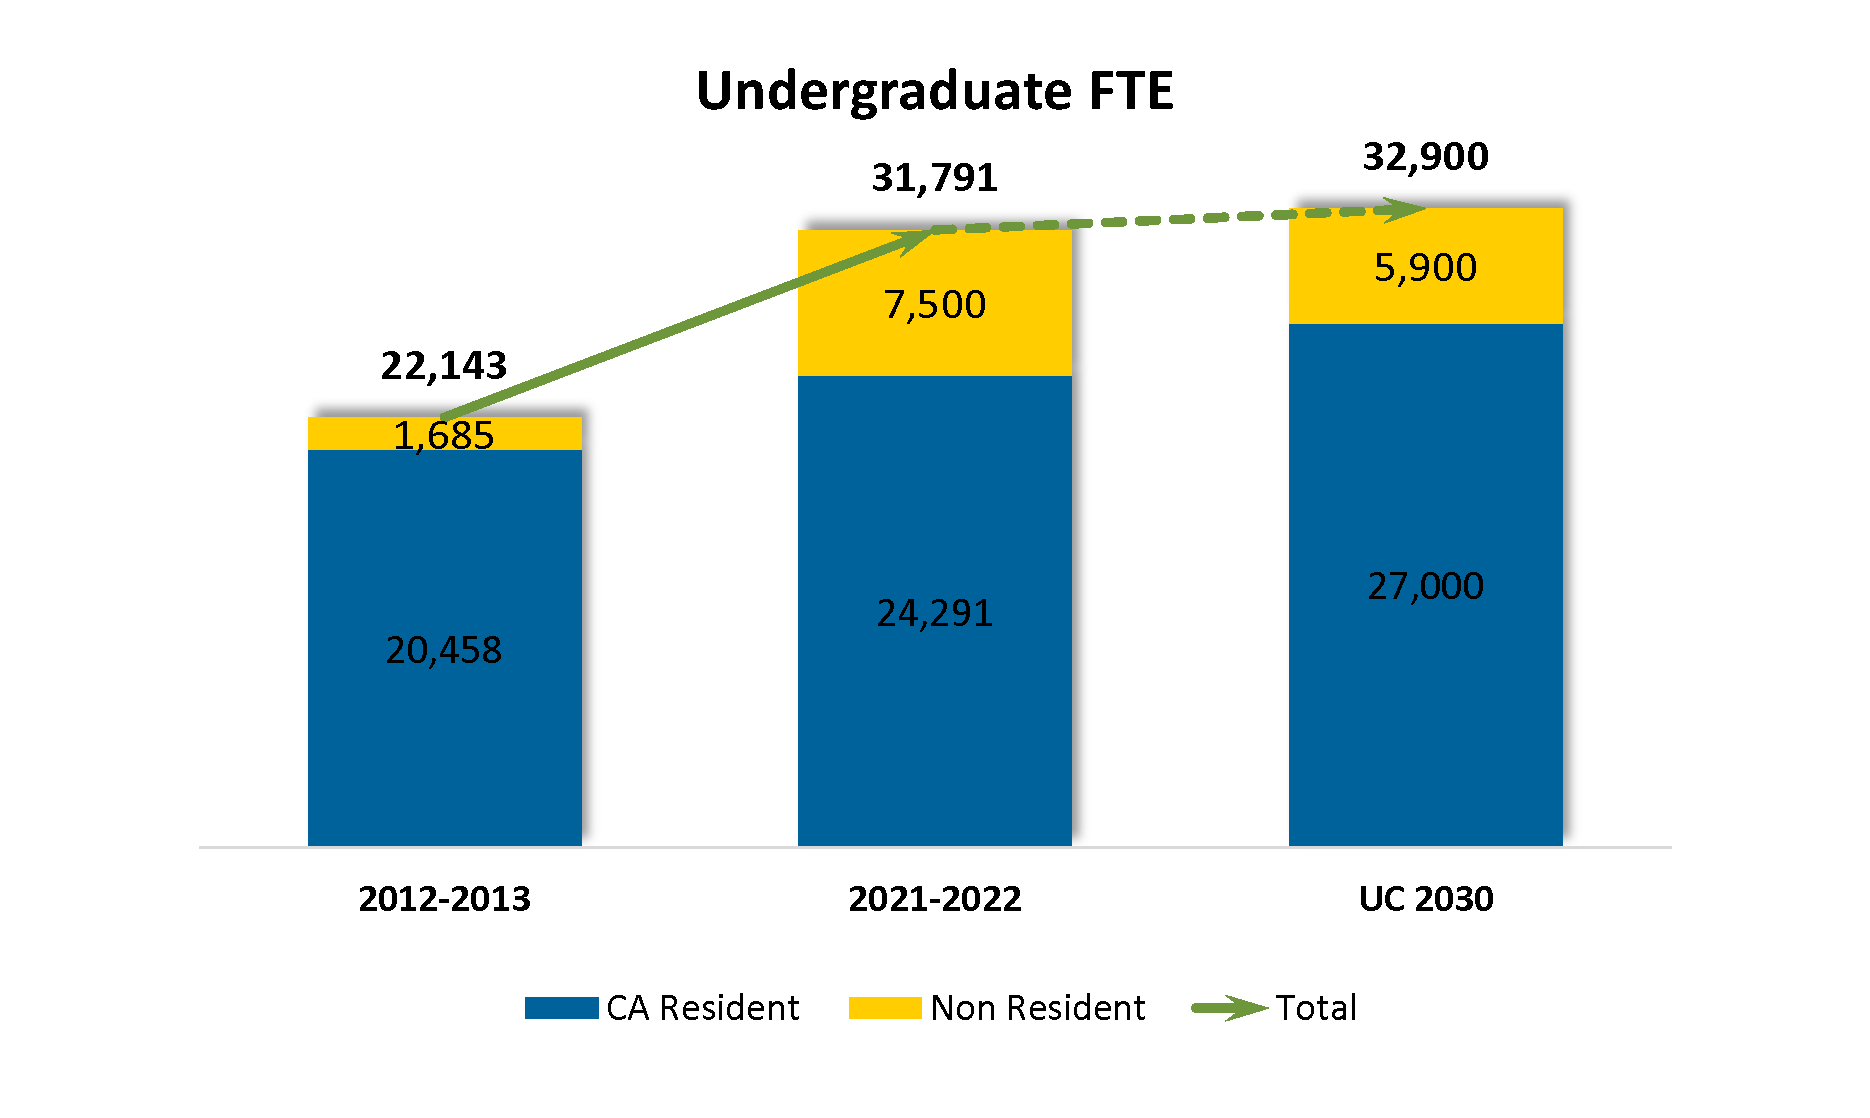 This shows increases in undergraduate enrollment. 